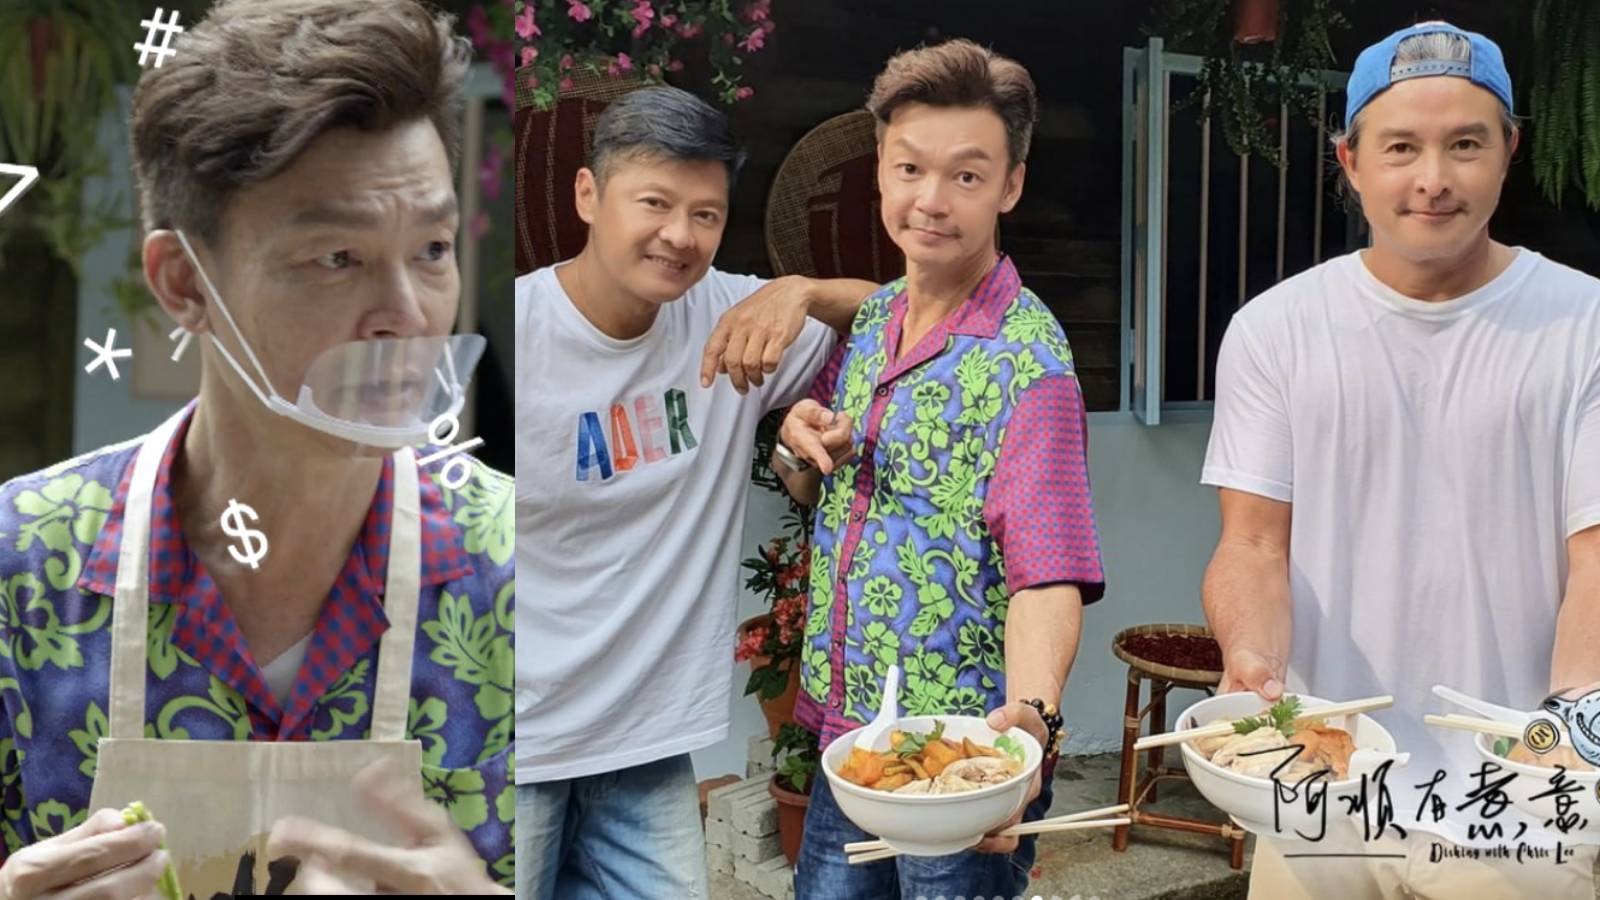 Mark Lee Teases Christopher Lee For “Looking Older” Than Him And Li Nanxing Despite Being Younger Than Both Of Them